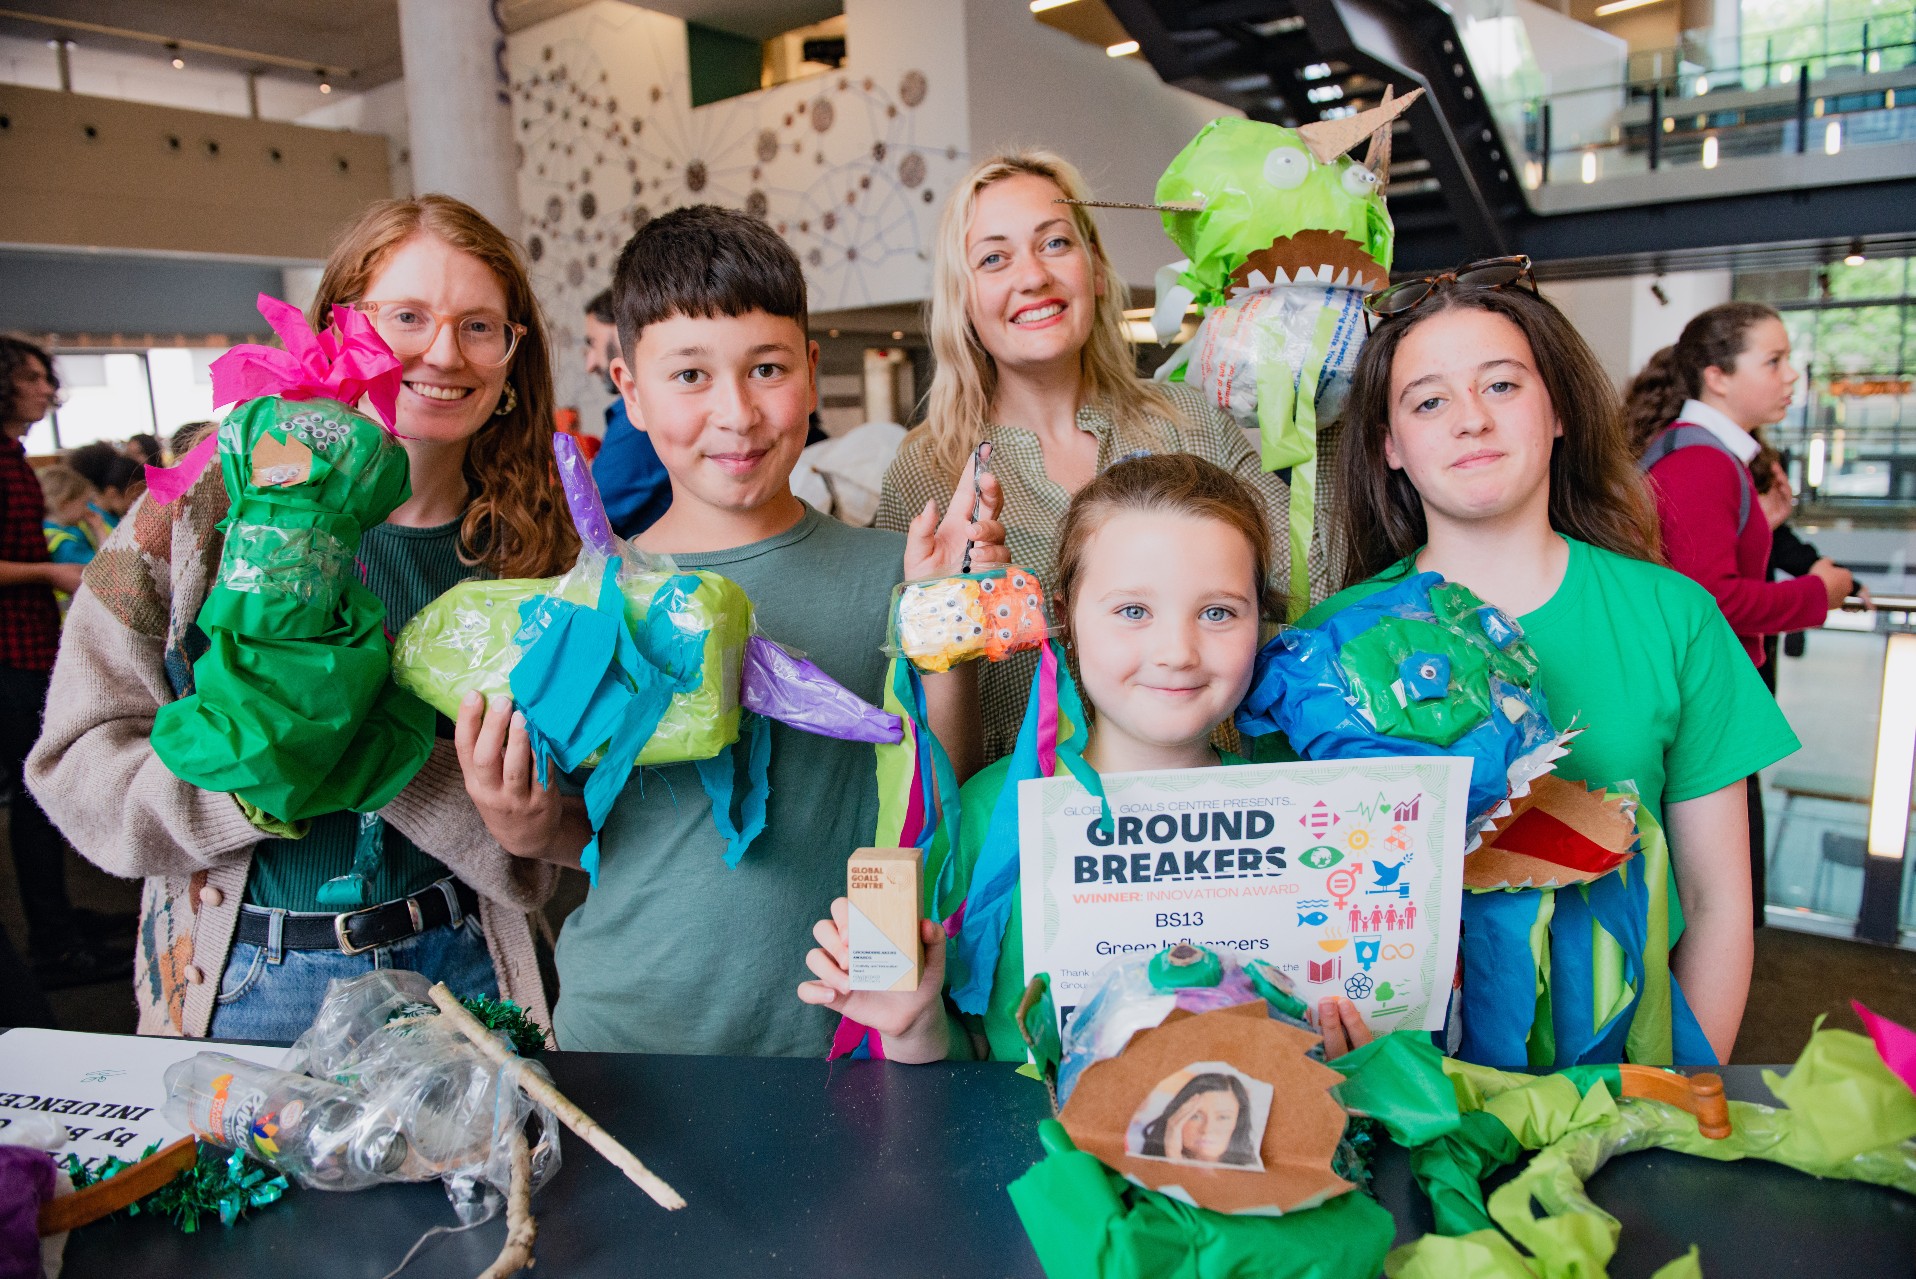 ‘Groundbreakers’ Awards presented to young Bristol climate and social justice heroes –  – University of Bristol – All news